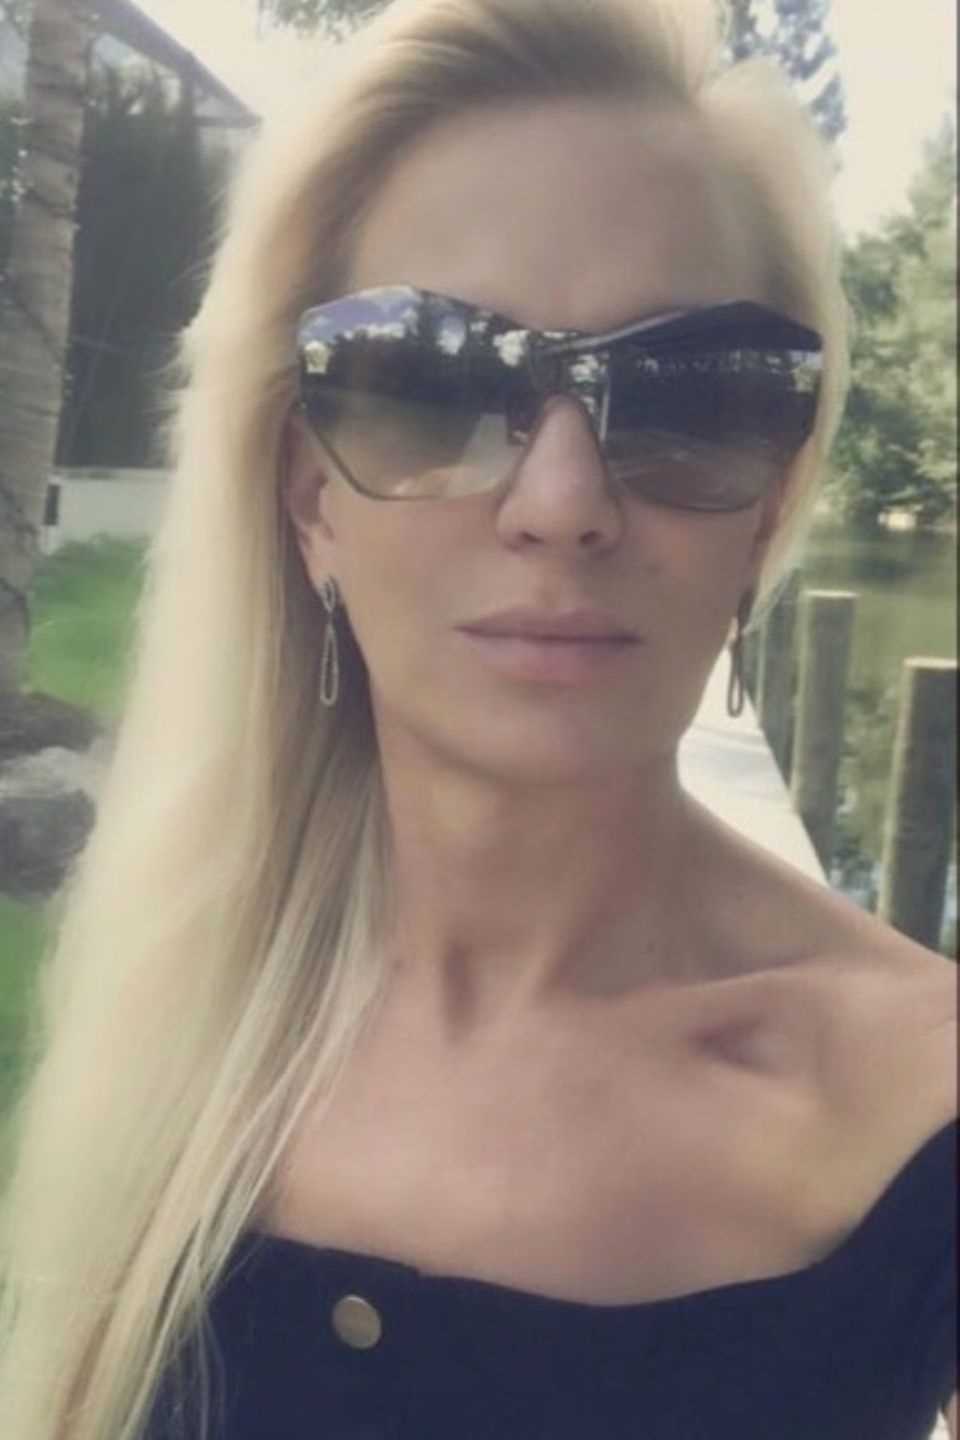 Claudia Norberg, Michael Wendler's ex, relies on eye-catching sunglasses from Versace (approx. 235 euros).  But she's wearing a different one now...